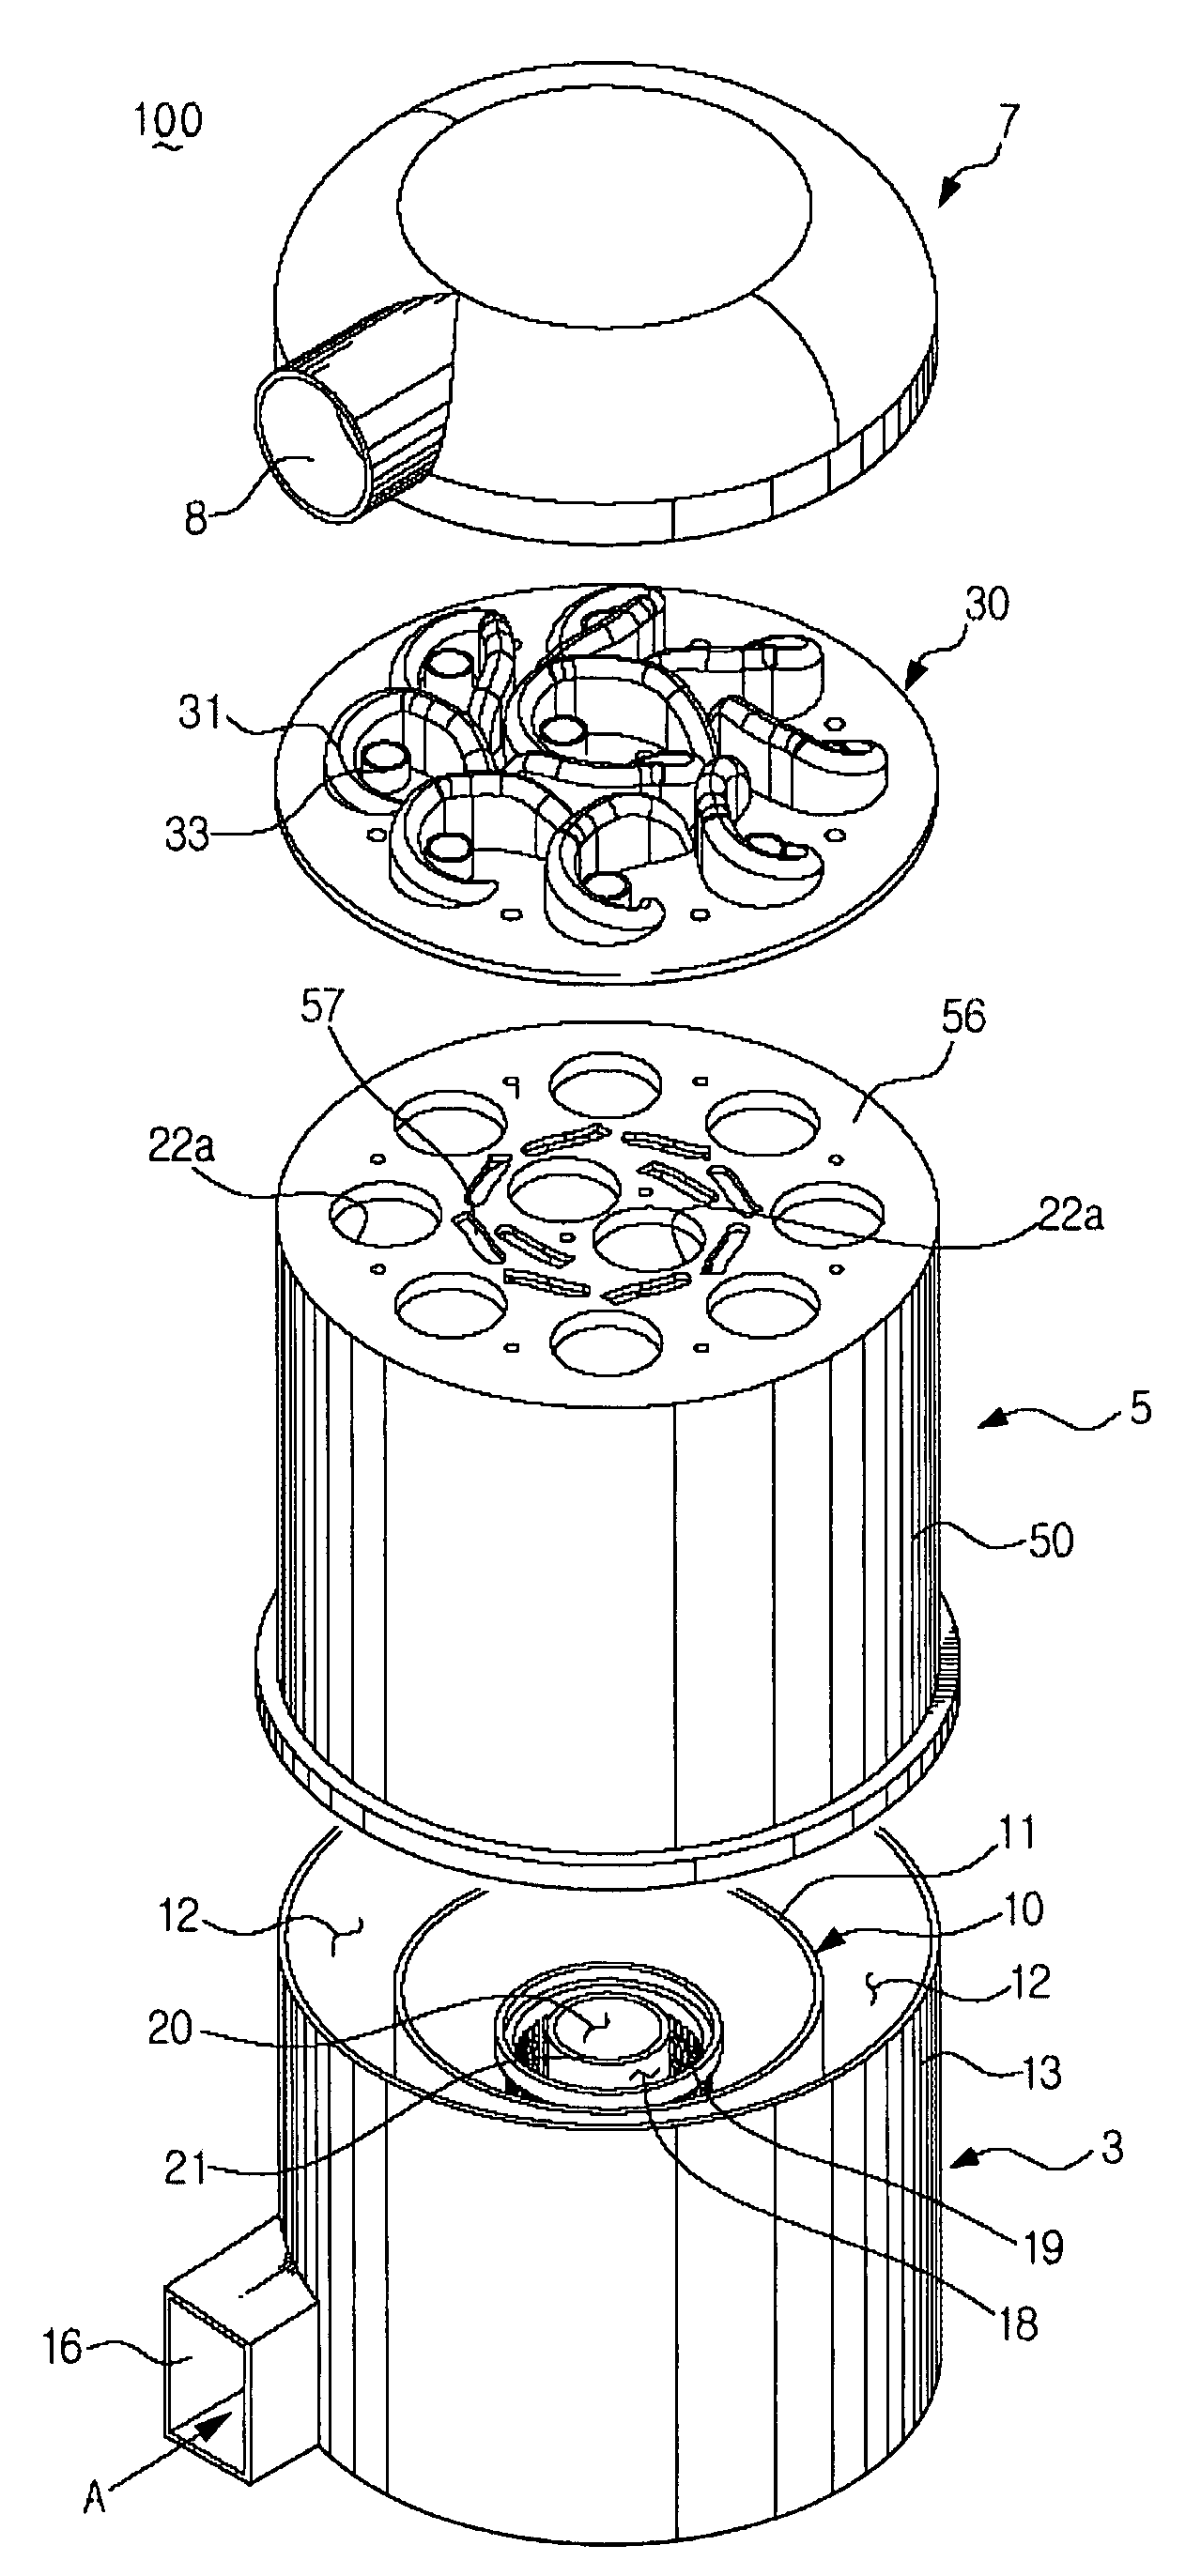 Cyclone separating apparatus for a vacuum cleaner